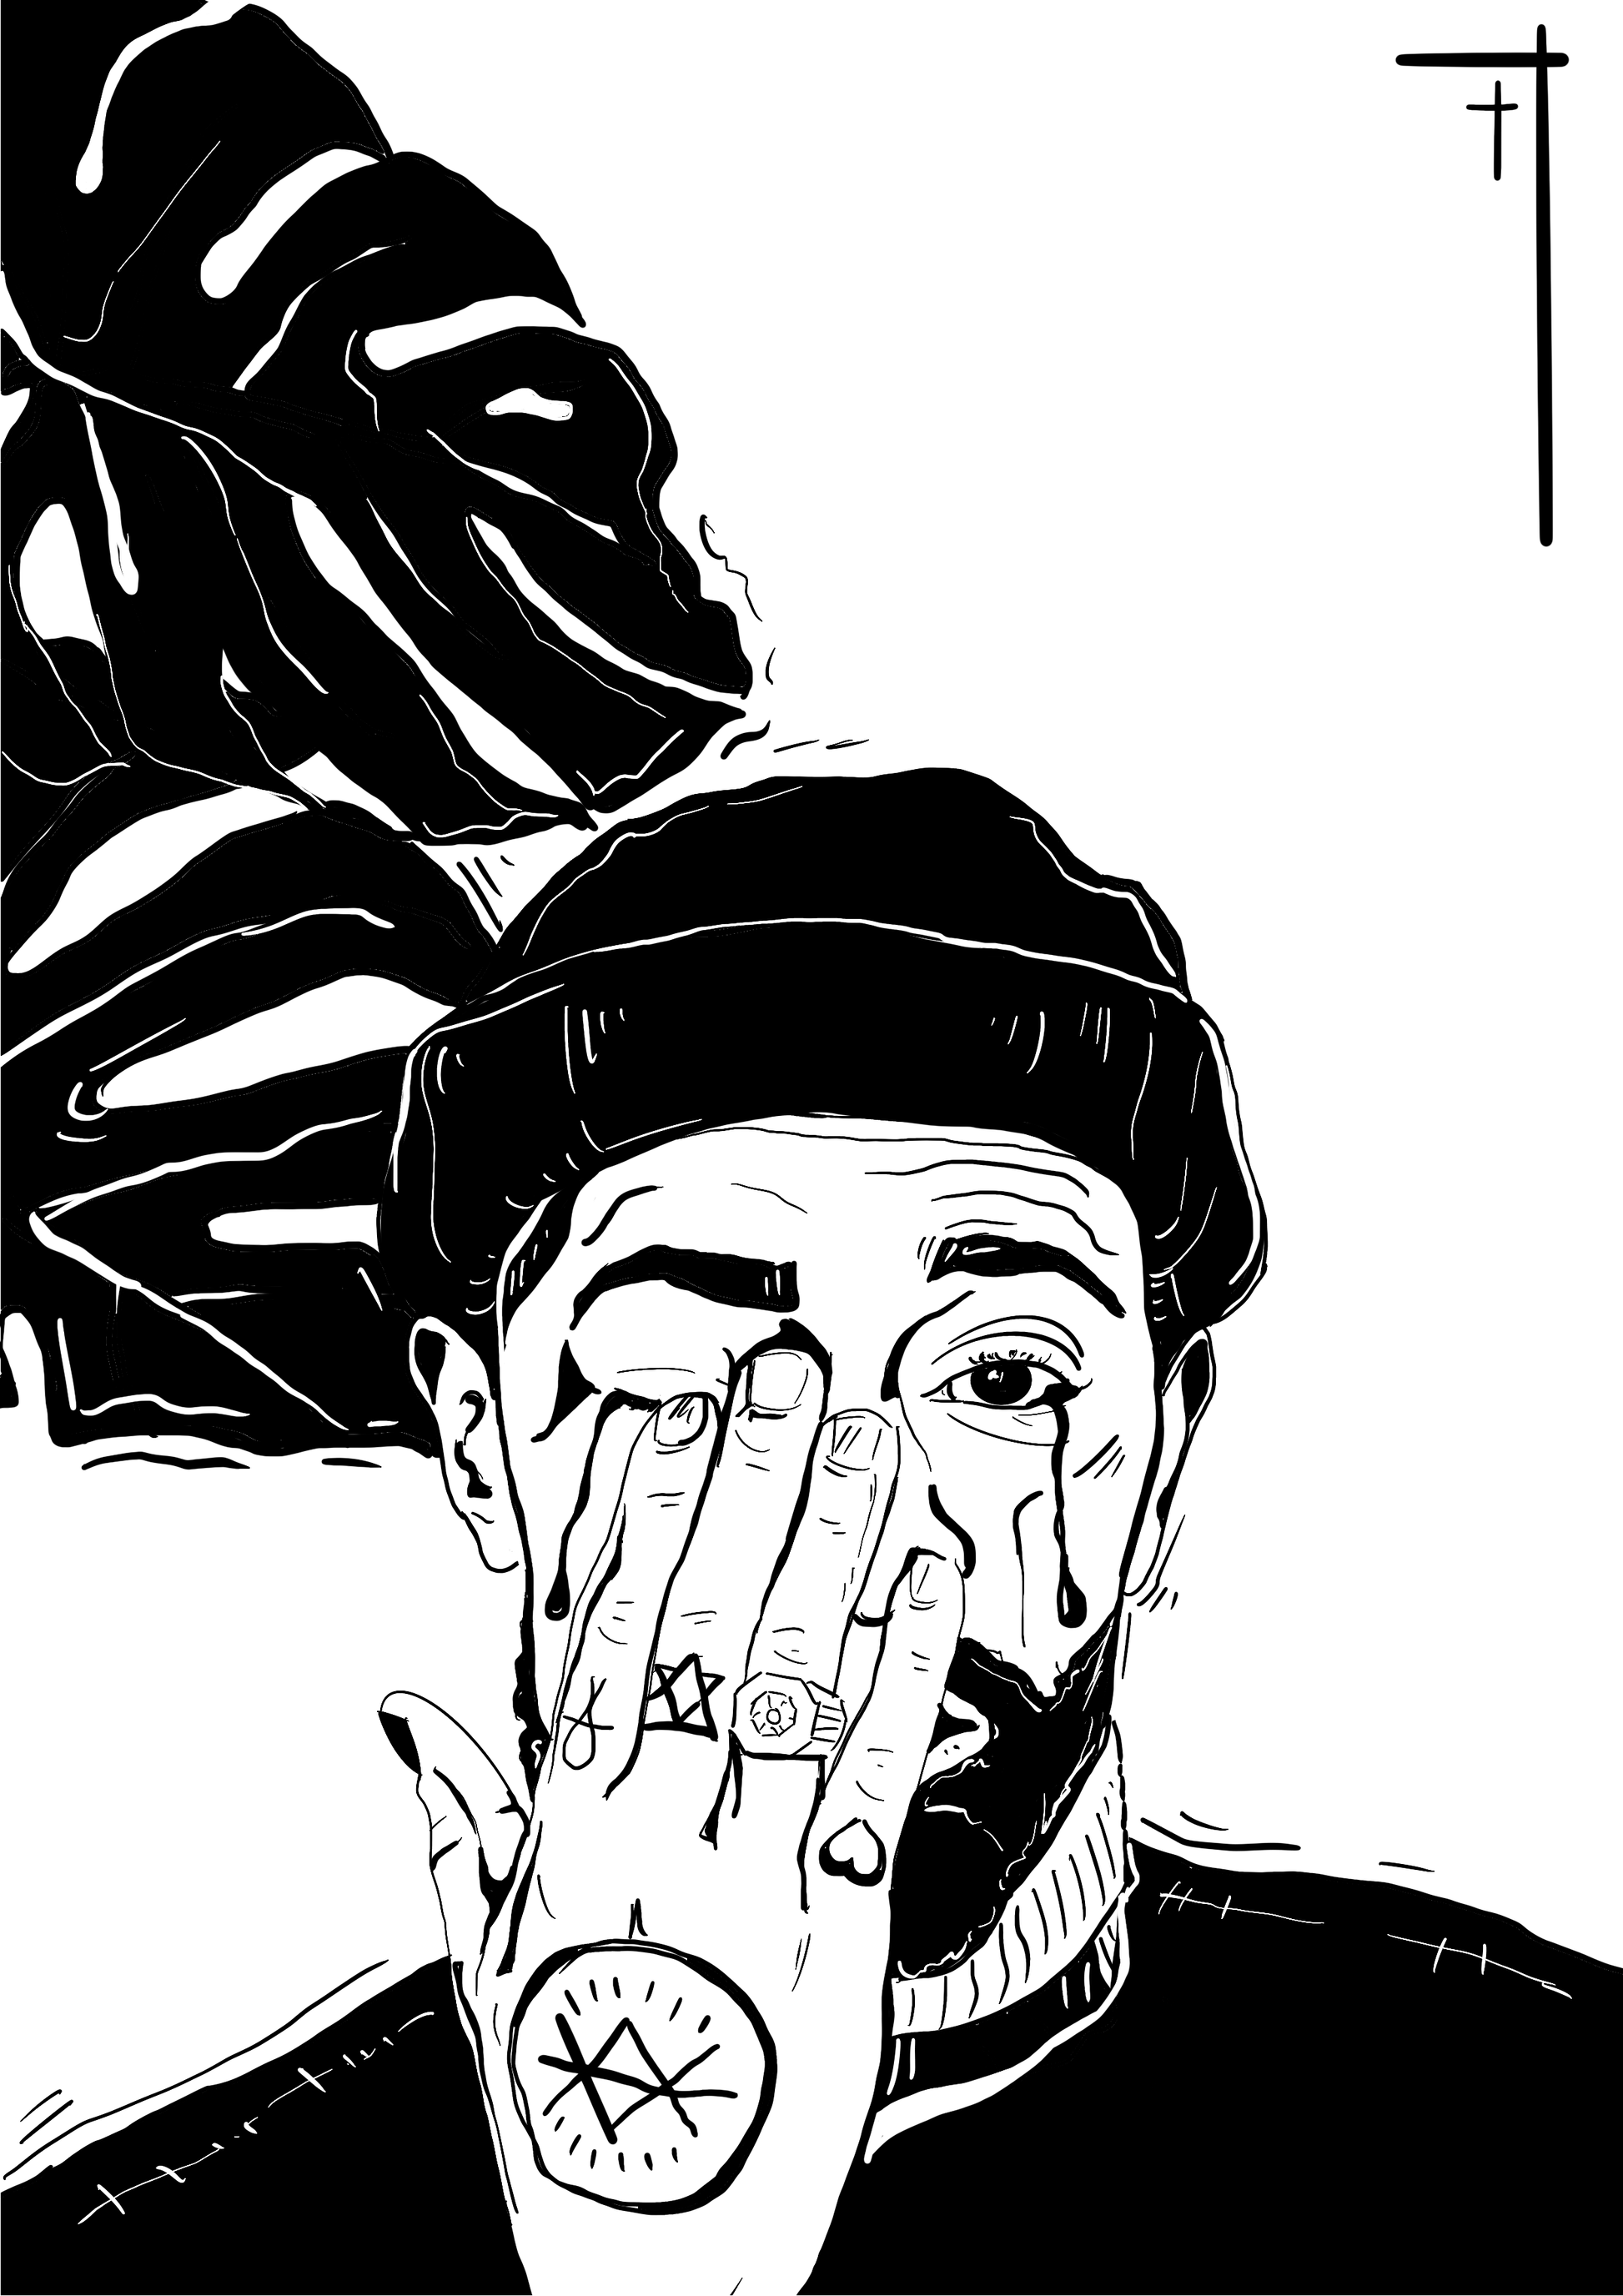 art print by LGBTQ+ artist Courtney L Ellis Illustrations of a tattooed man crying balck and white drawing wall art home decor gifts gay friendly diverse